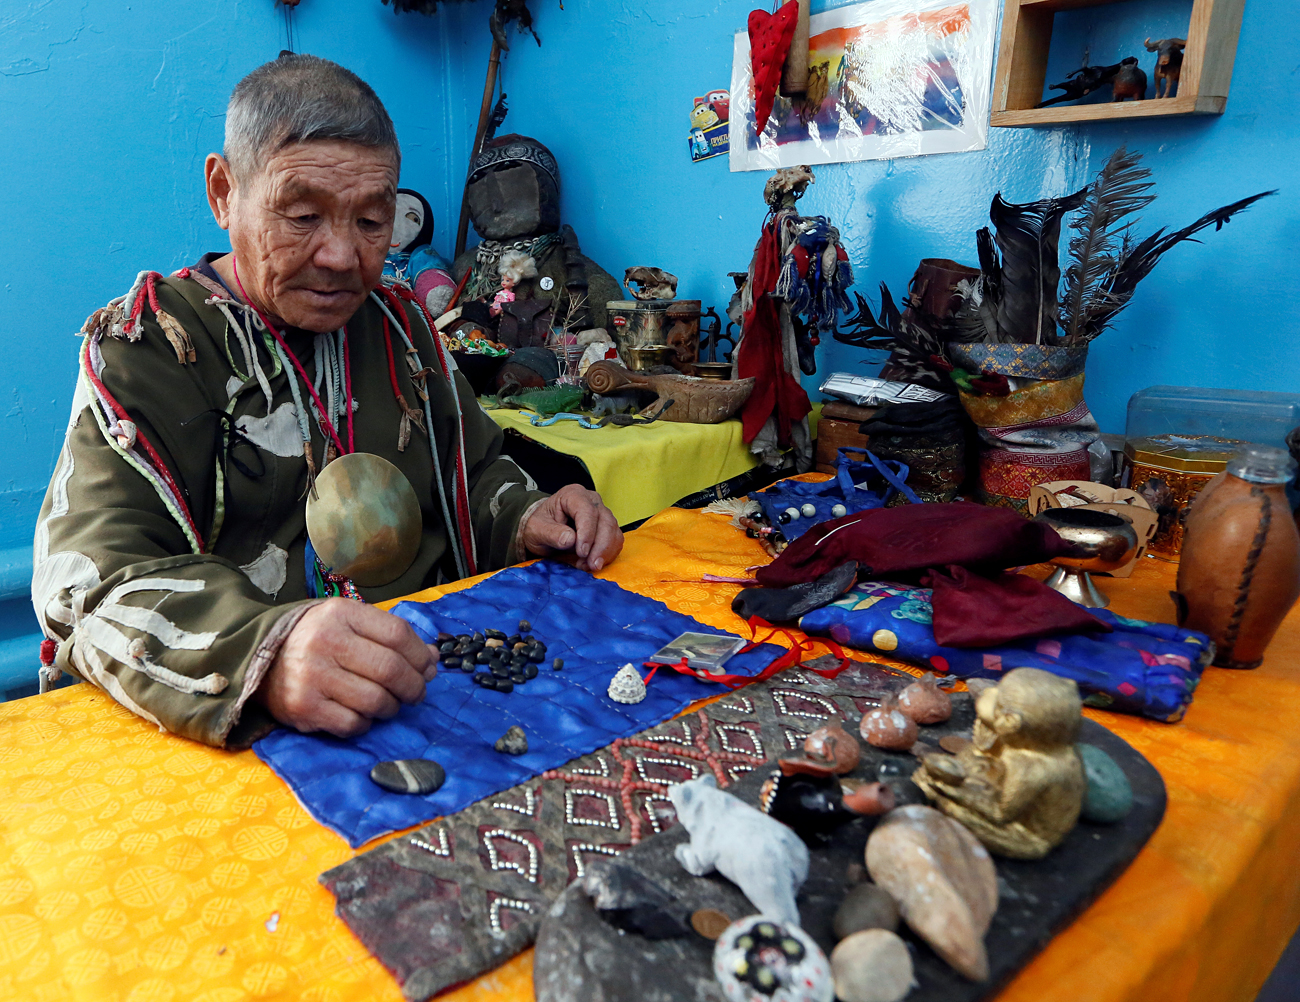 Vasily Tyulyush, a shaman representing the so-called Adyg Eeren (Bear Spirit) society, sits at a table while waiting for visitors inside a residence in the town of Kyzyl, the administrative centre of the Republic of Tuva (Tyva region) in Southern Siberia, Russia. The region is inhabited by Tuvans, historically cattle-herding nomads, who nowadays practise two main confessions - Buddhism and Shamanism.